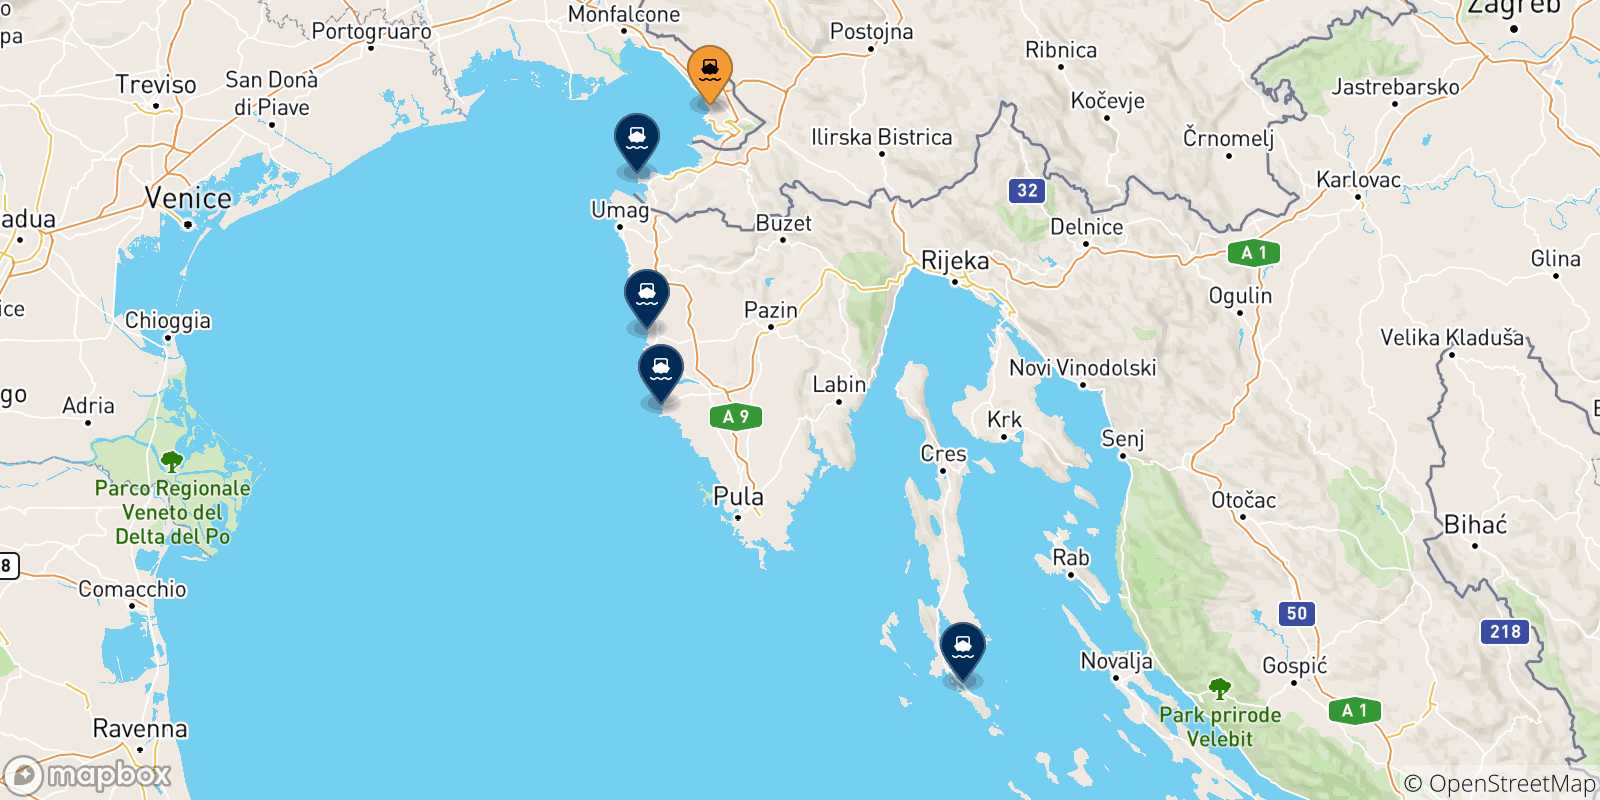 Map of the possible routes between Trieste and Croatia